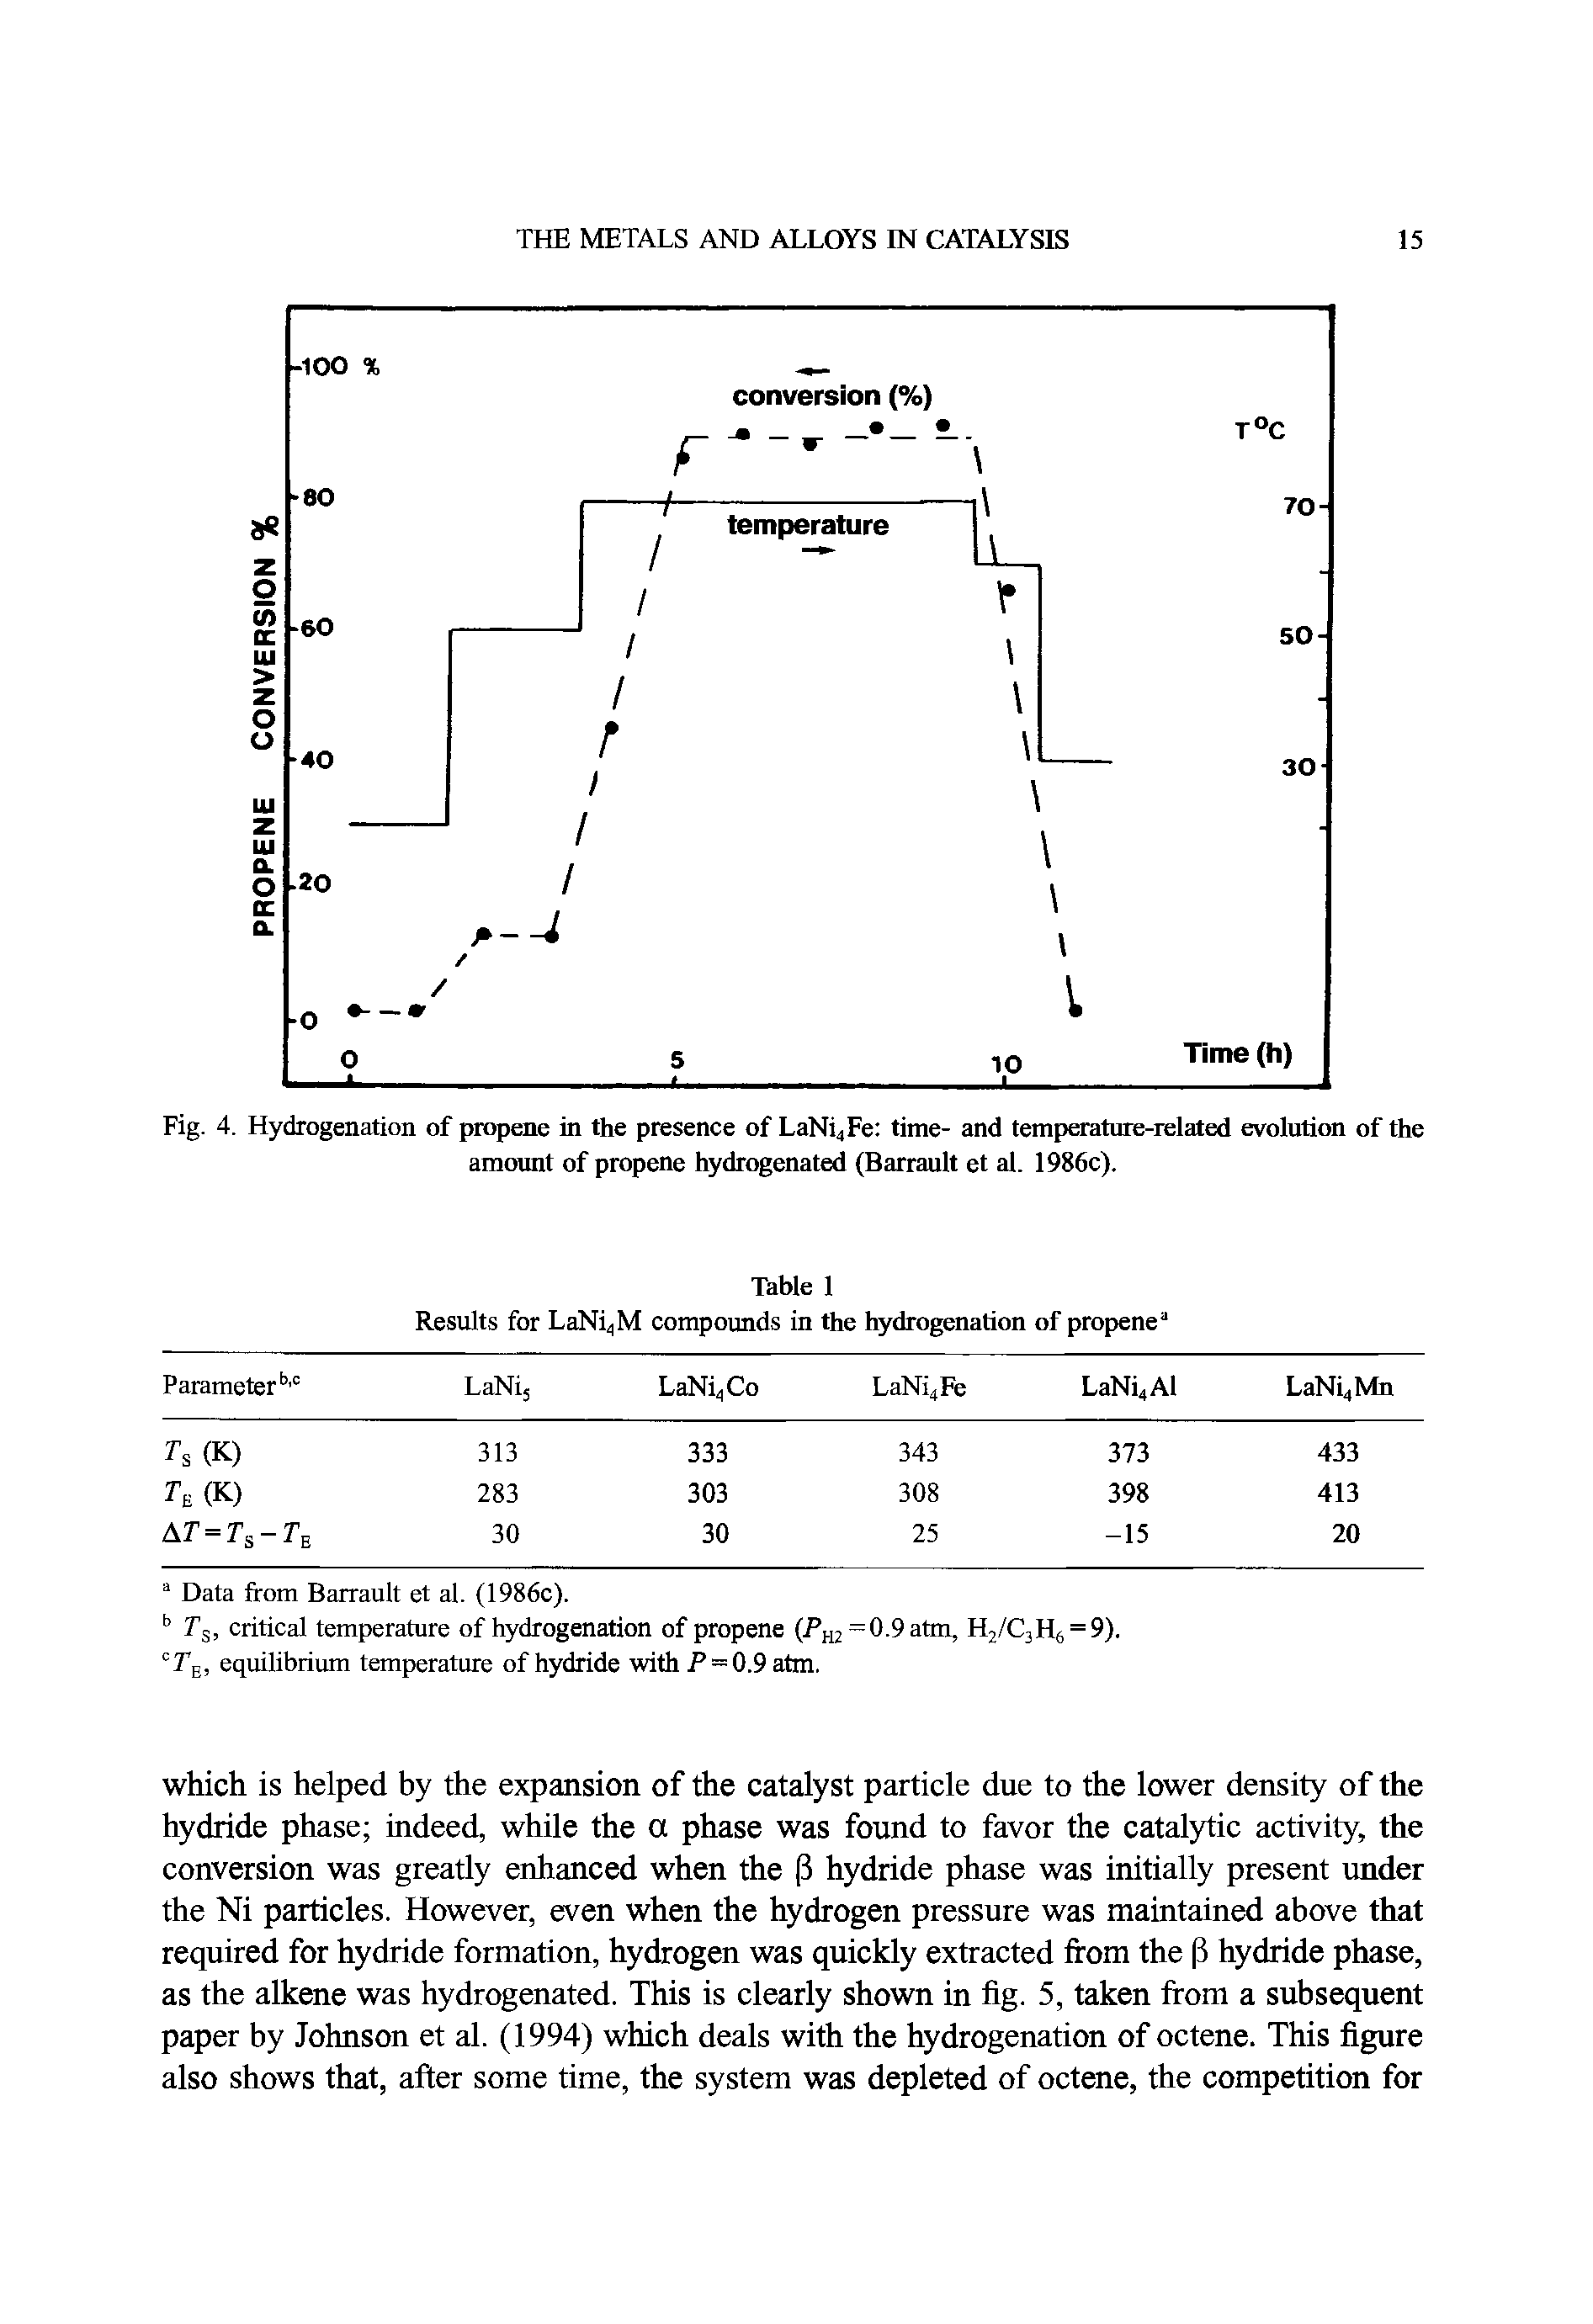 Fig. 4. Hydrogenation of propene in the presence of LaNi4Fe time- and temperature-related evolution of the amount of propene hydrogenated (Barrault et al. 1986c).